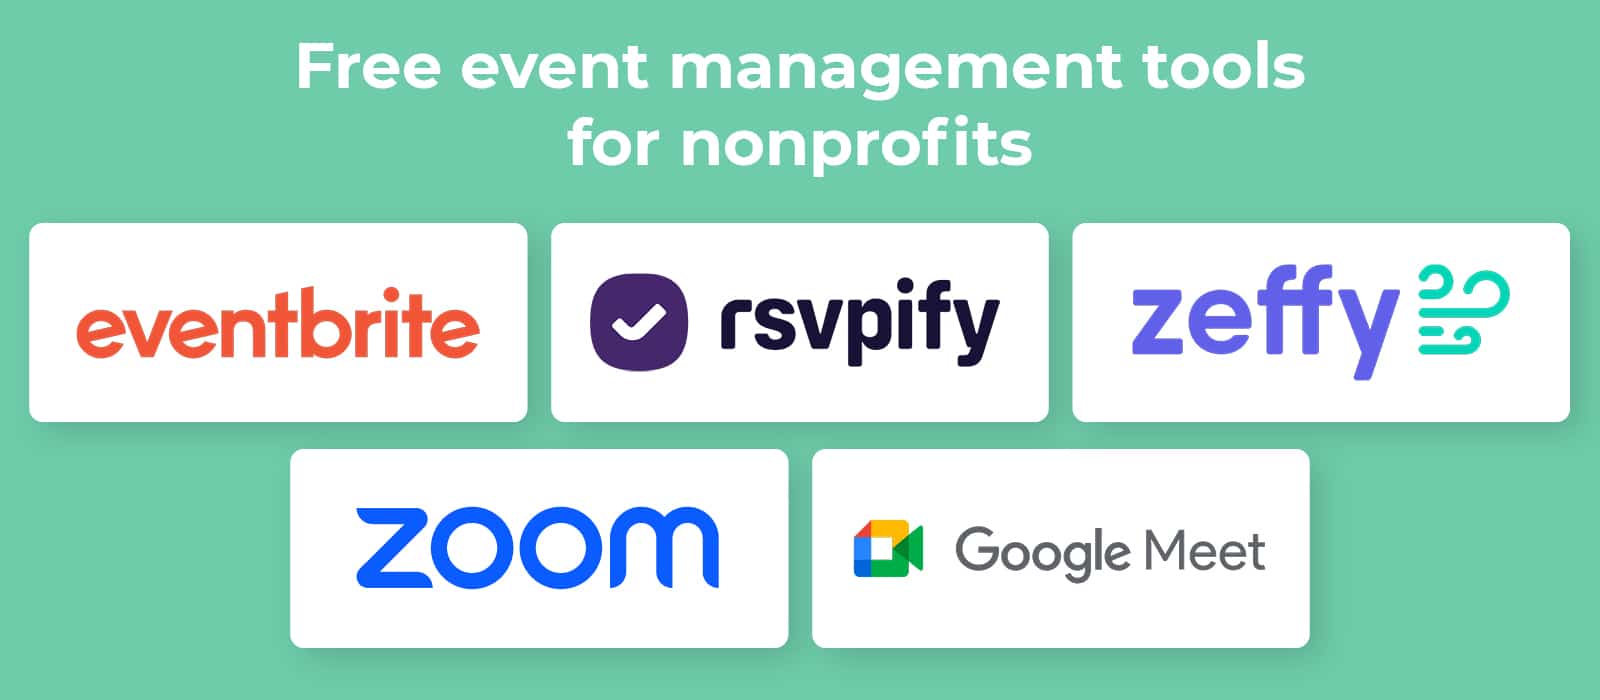 Logos for the free event management tools for nonprofits, listed below